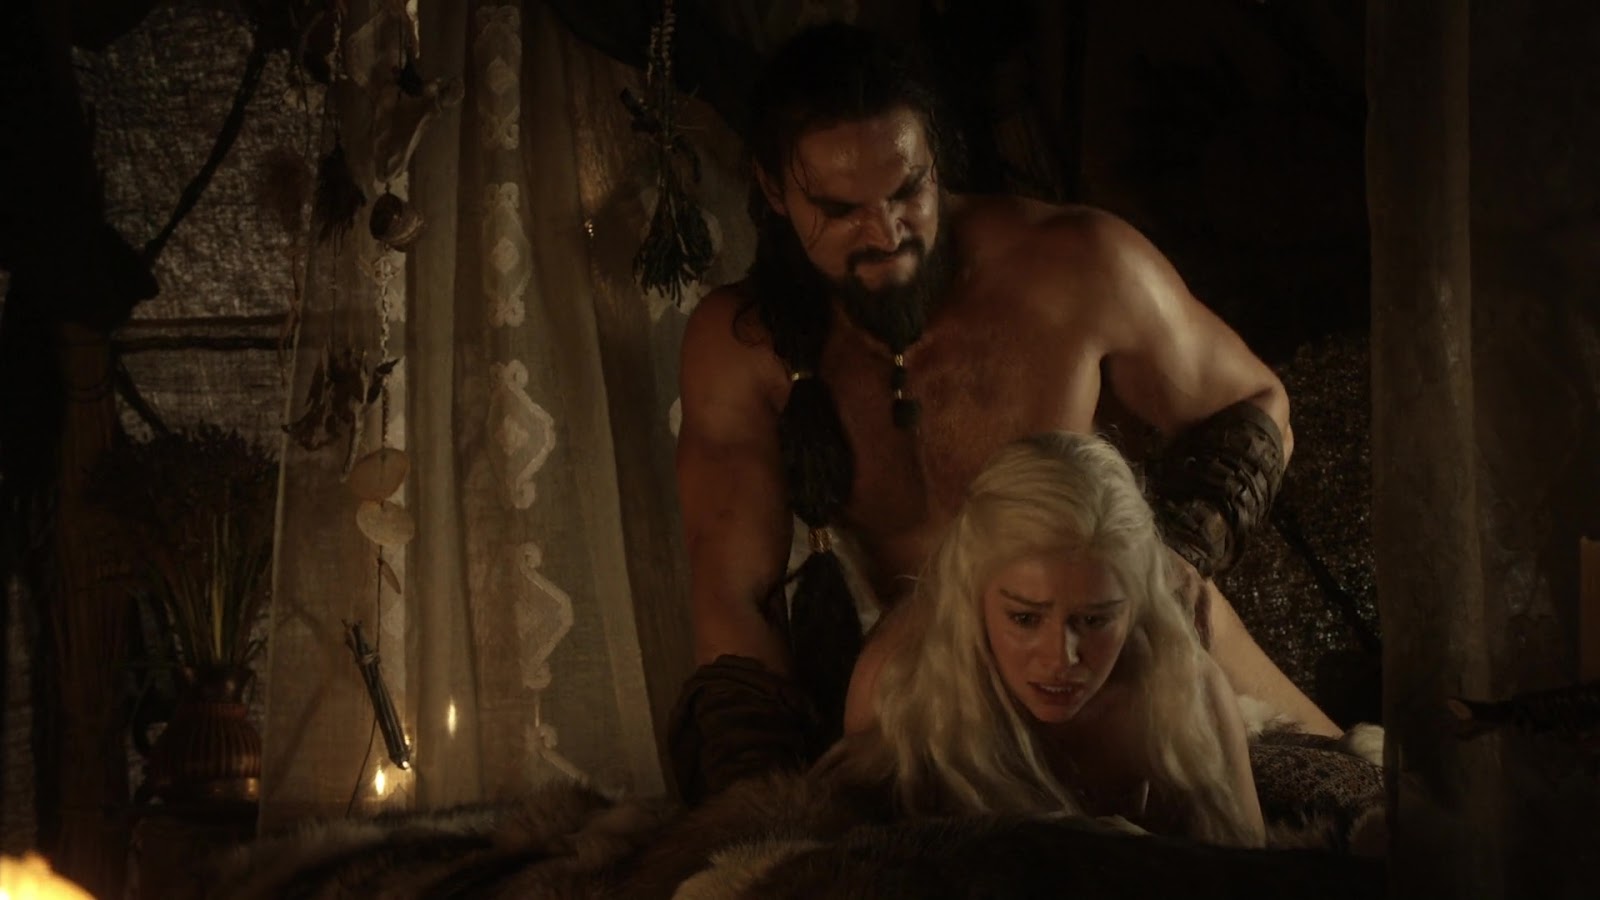 Jason Momoa nude in Game Of Thrones 1-02 "The Kingsroad" .